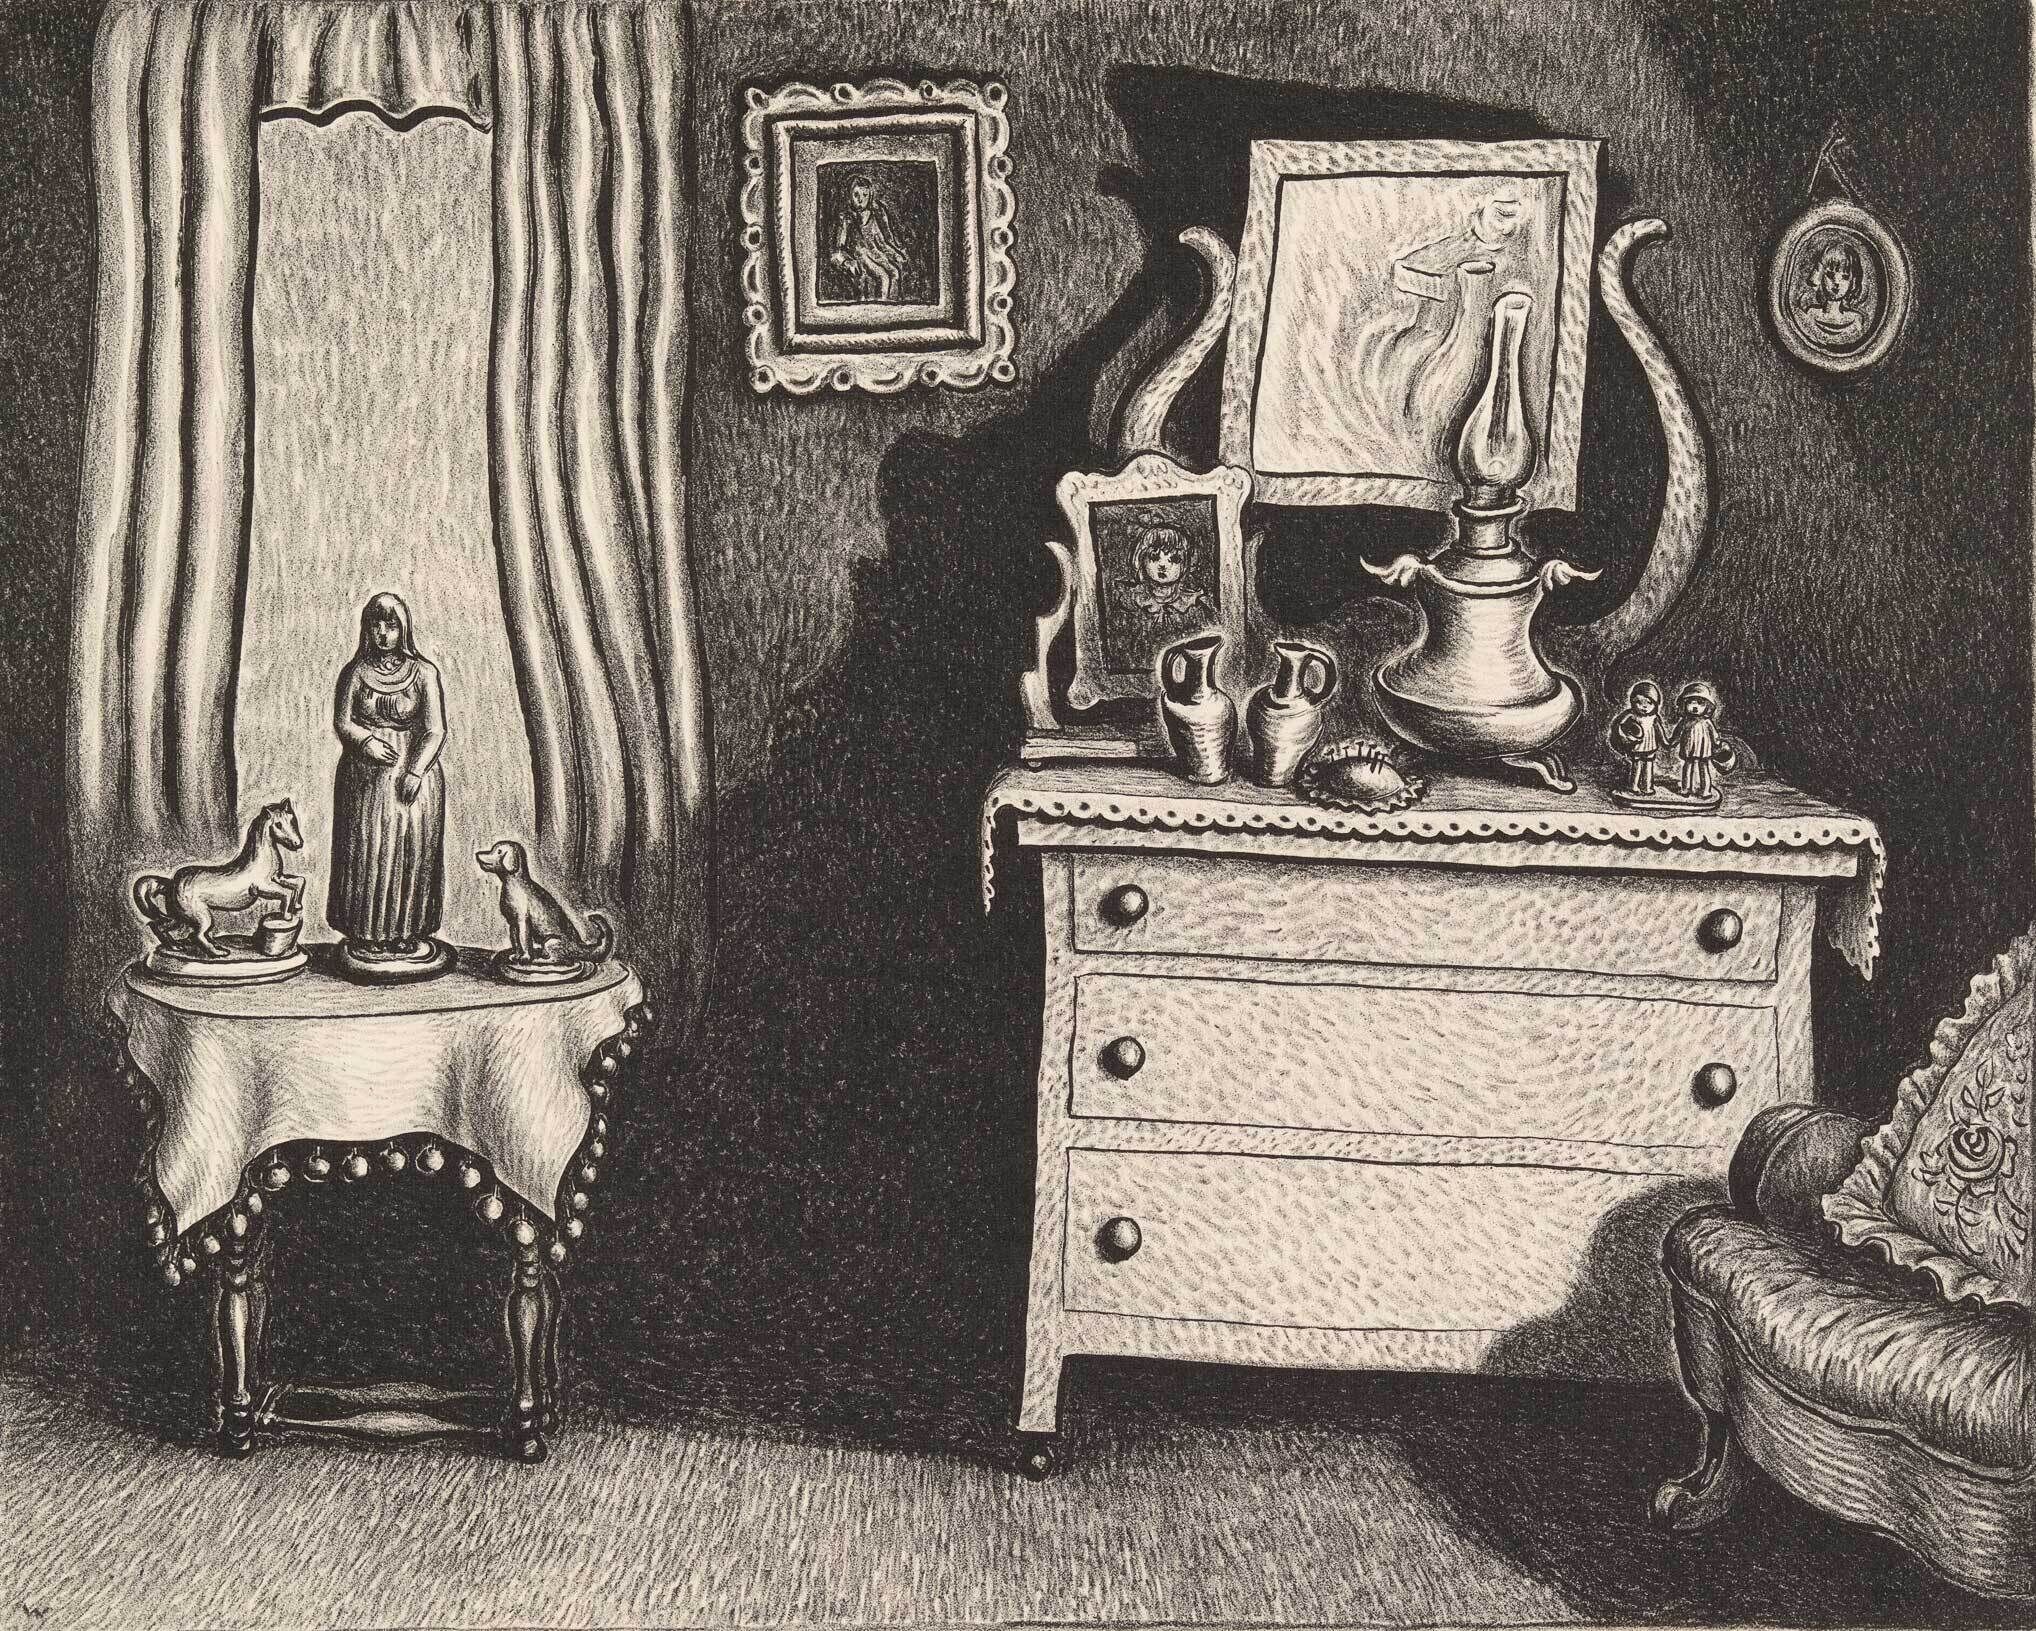 Vintage drawing of a room corner with a draped table, dresser, ornate lamp, and various small figurines.